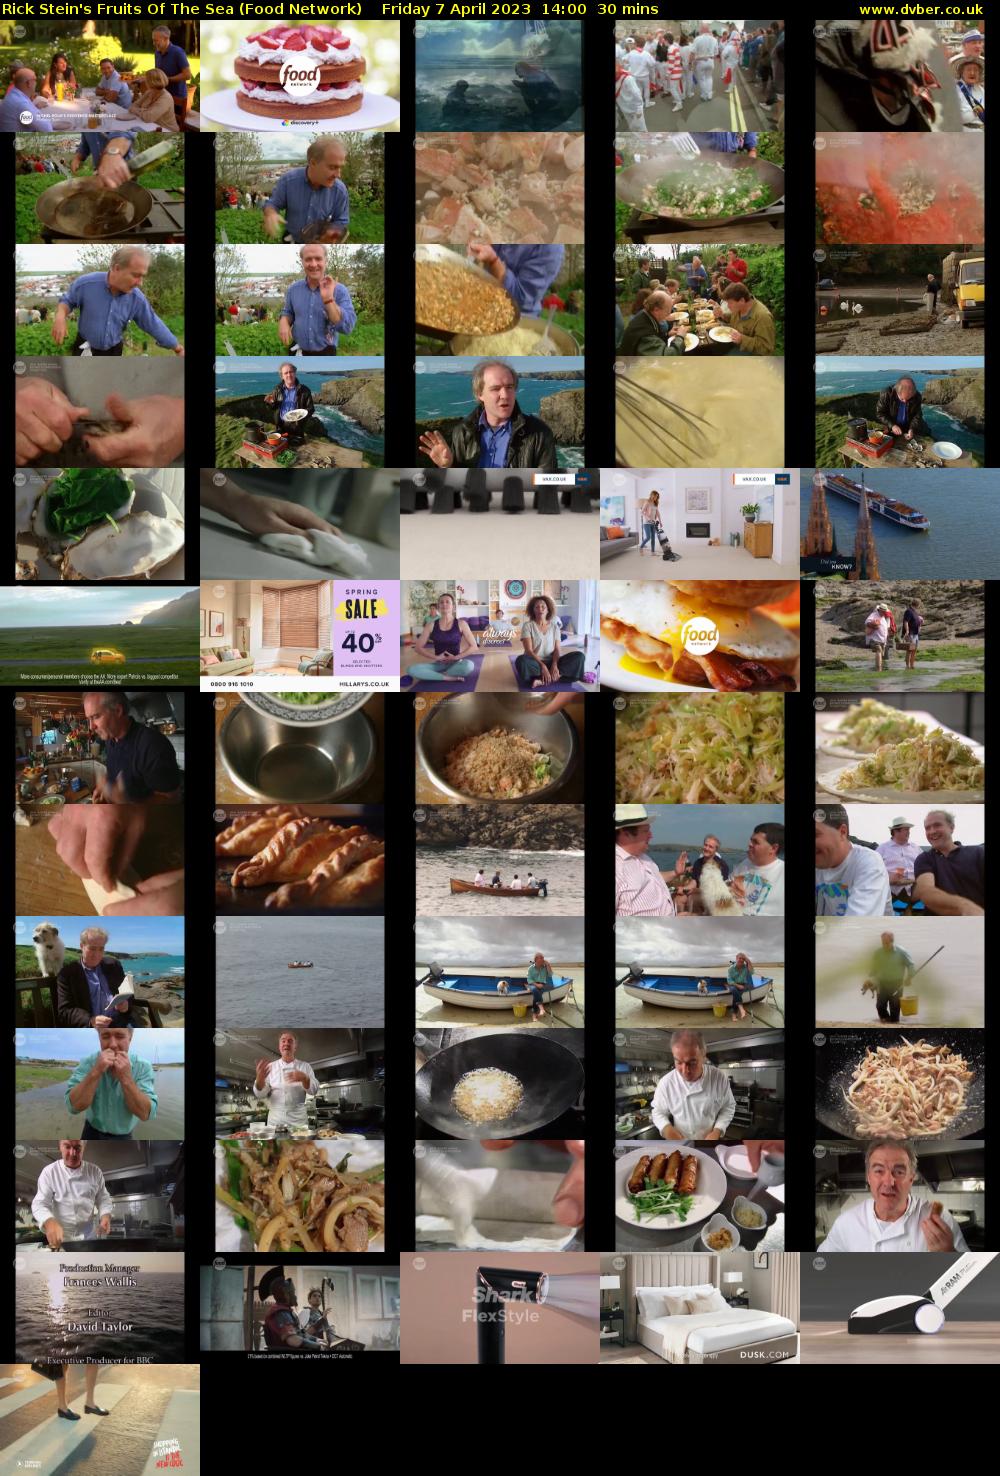 Rick Stein's Fruits Of The Sea (Food Network) Friday 7 April 2023 14:00 - 14:30